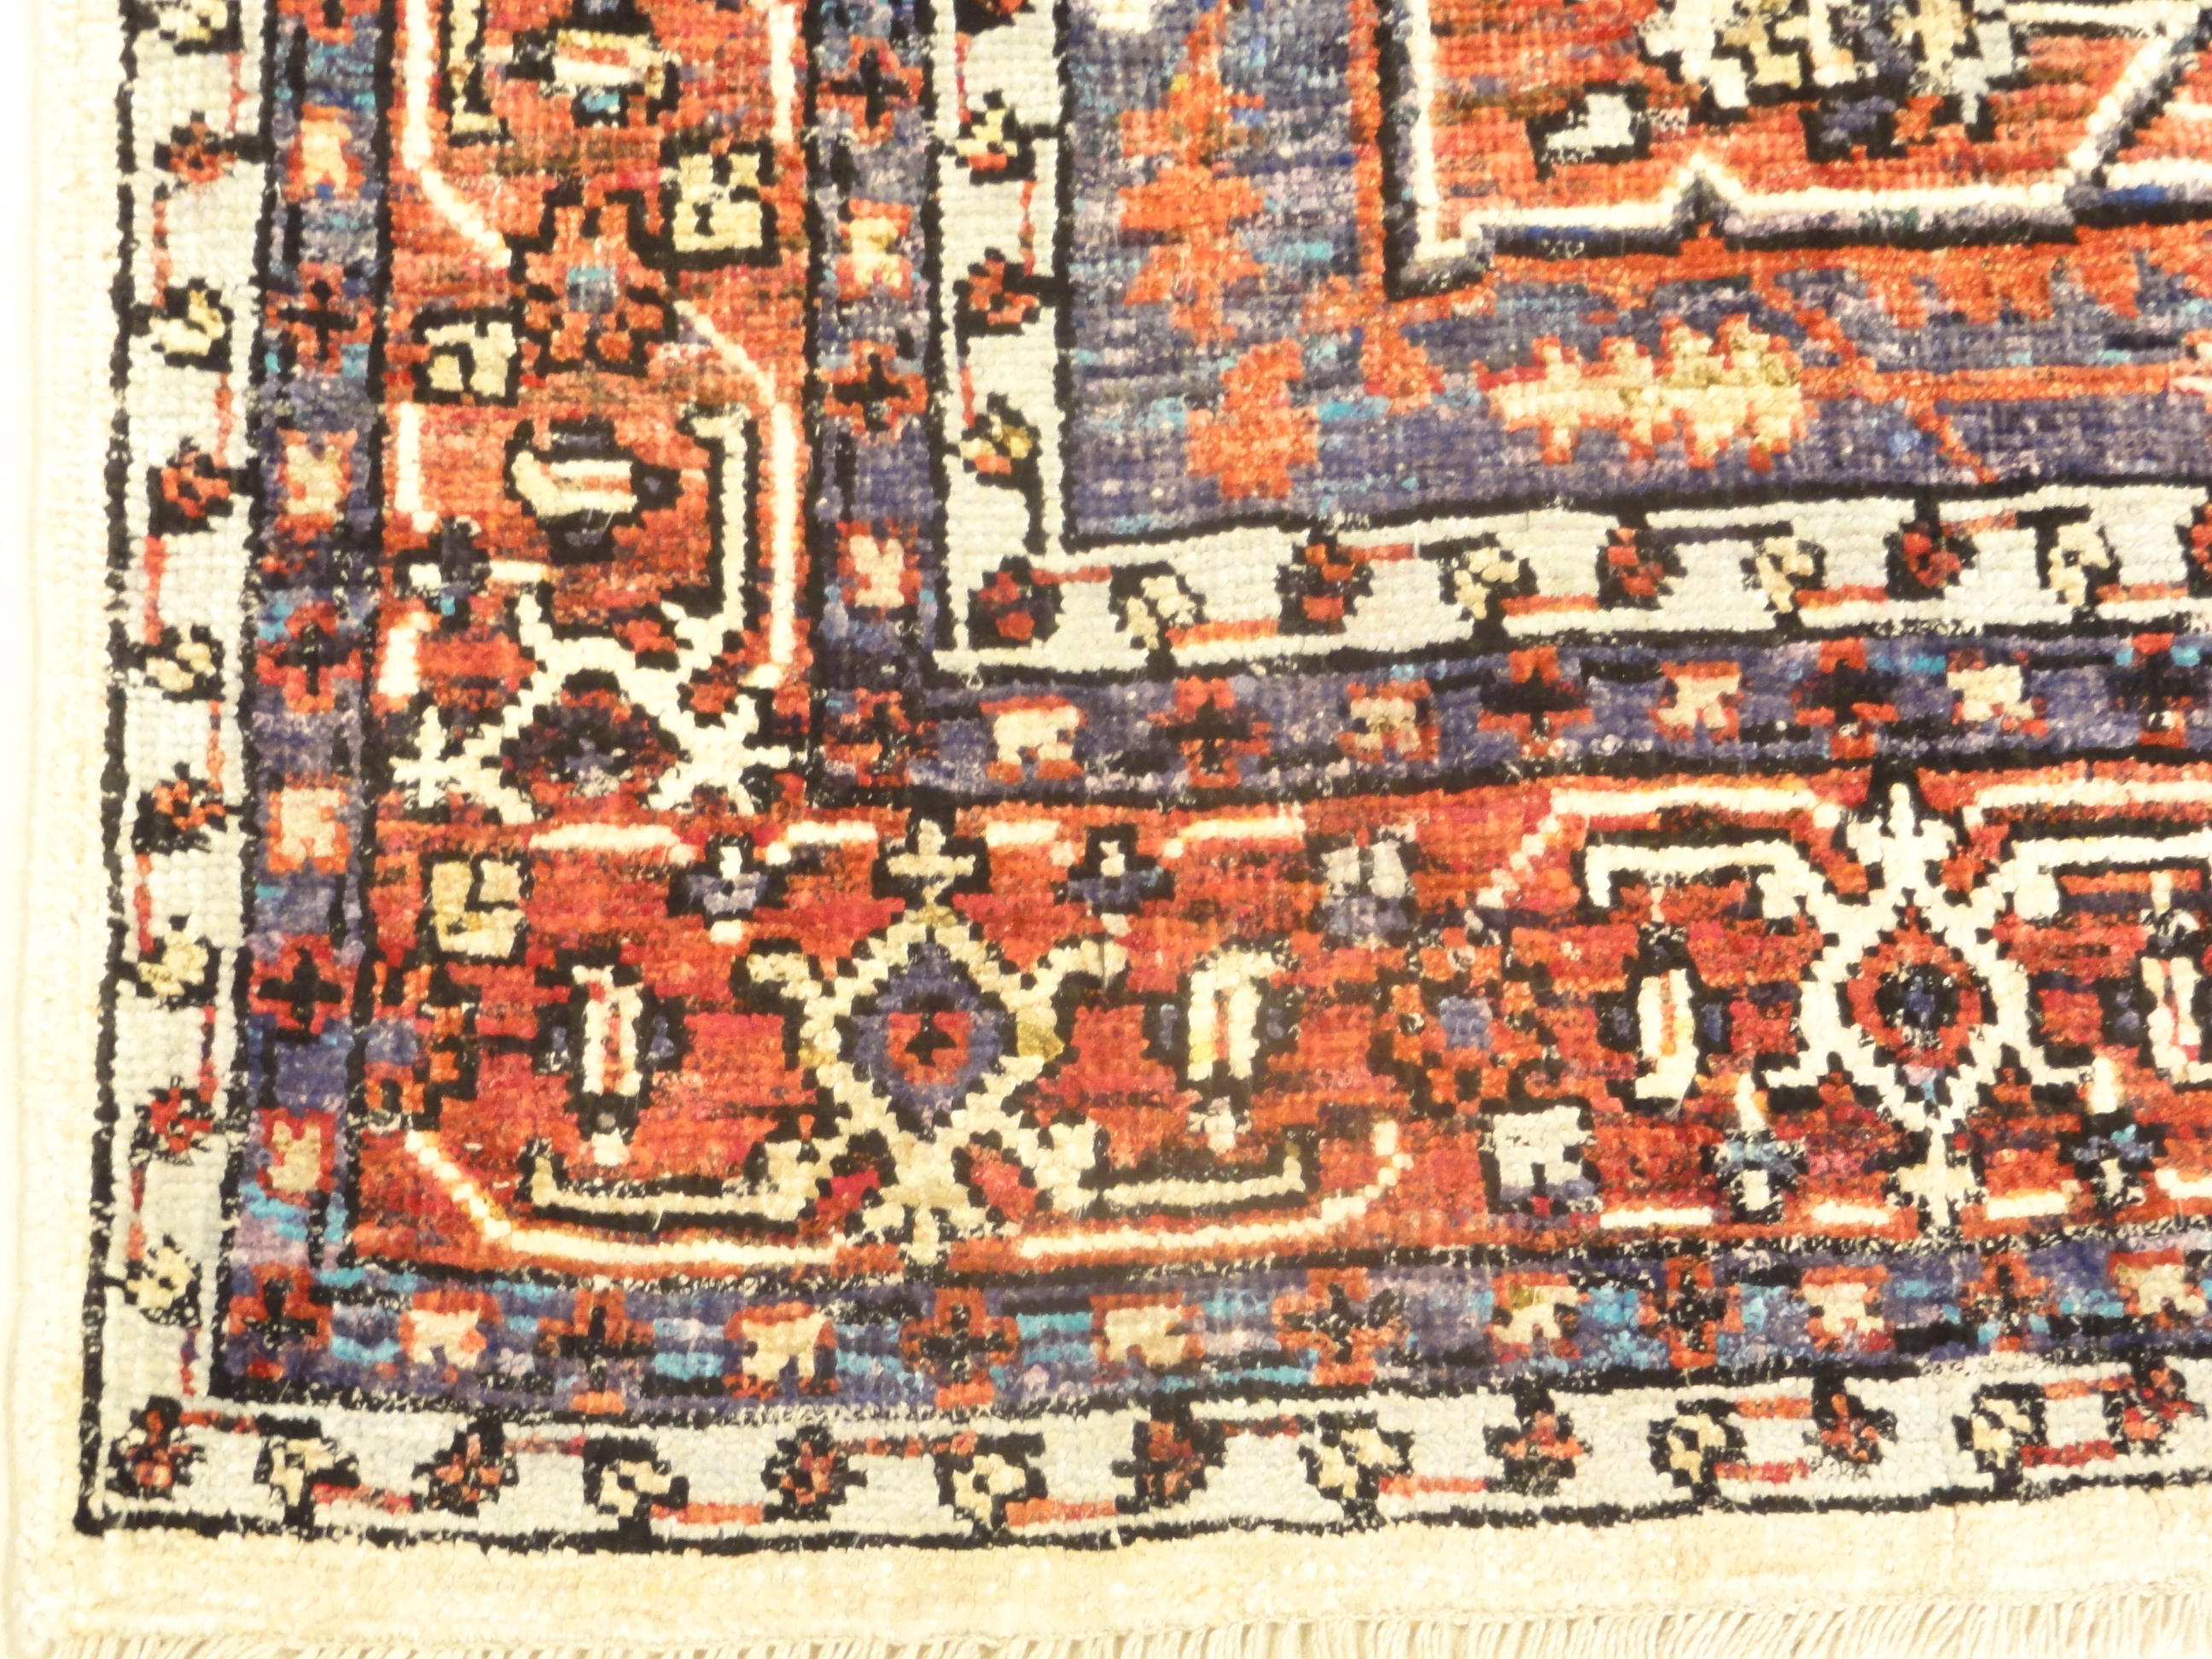 Saree Silk Indian Rug. A piece of genuine woven authentic carpet art sold by Santa Barbara Design Center and Rugs and More.